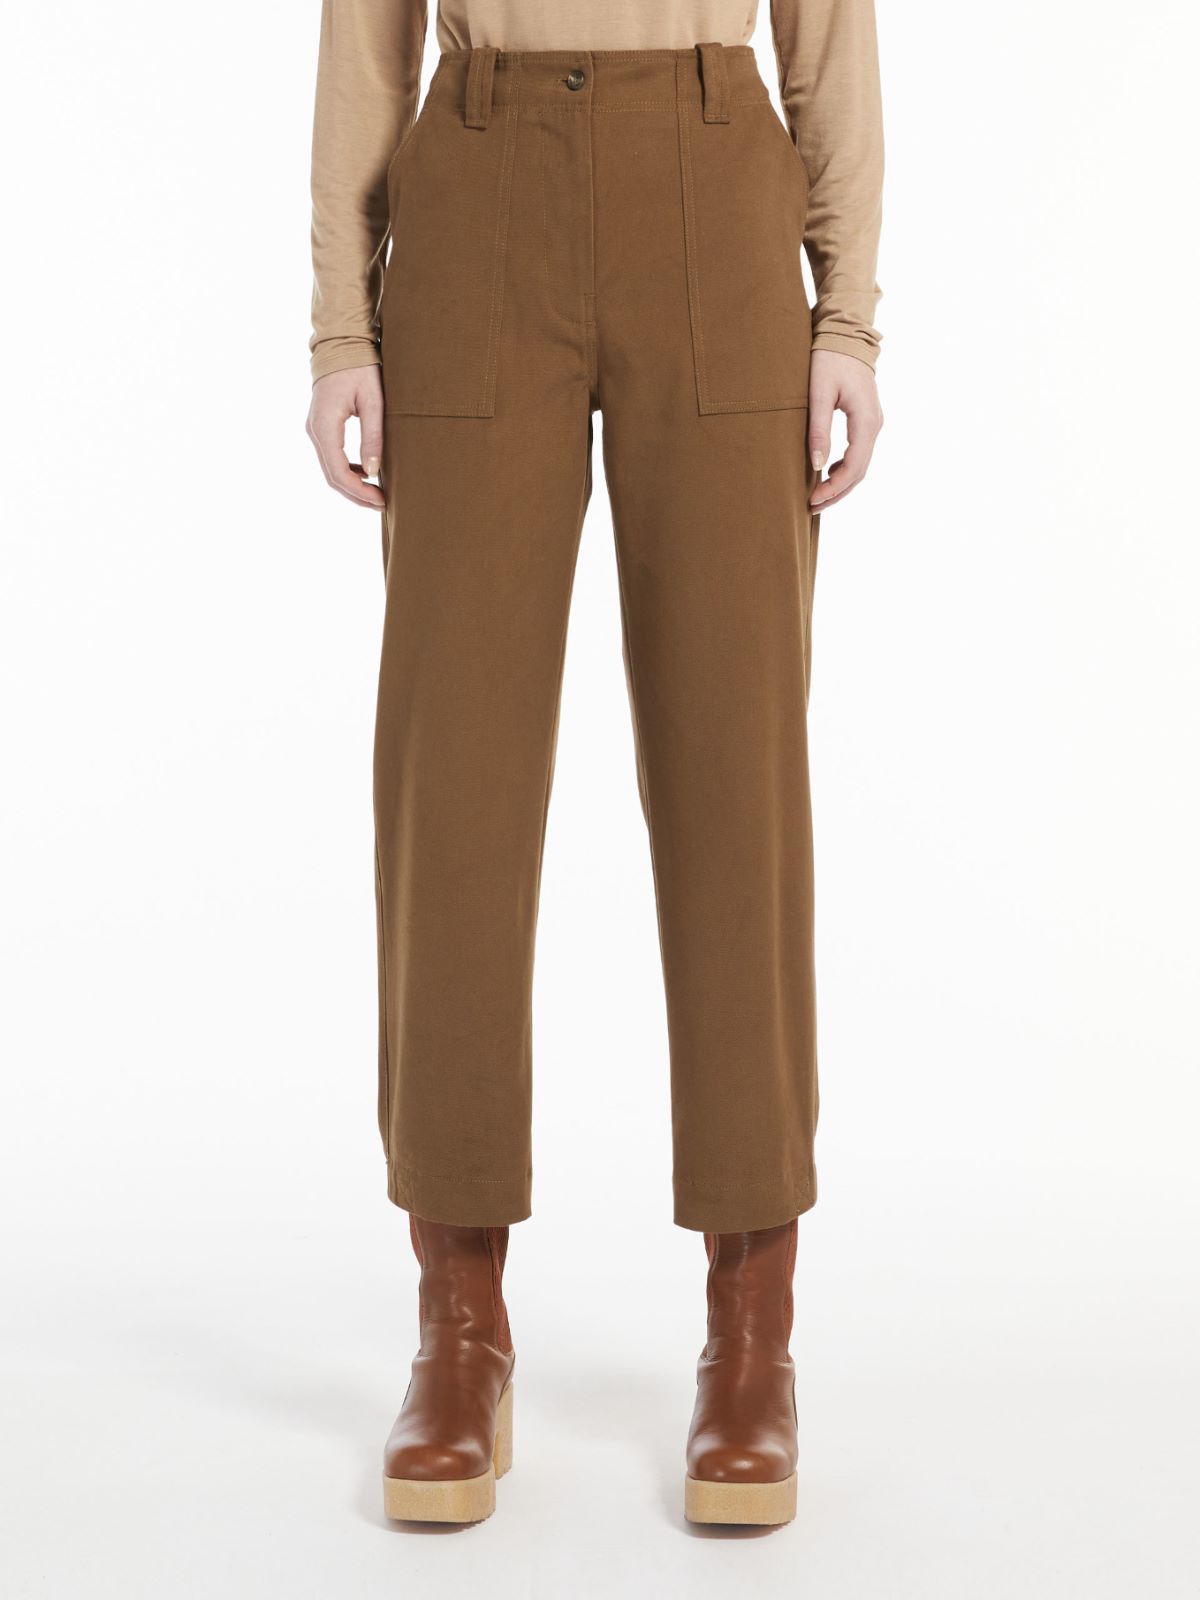 Cotton drill trousers - TOBACCO - Weekend Max Mara - 2